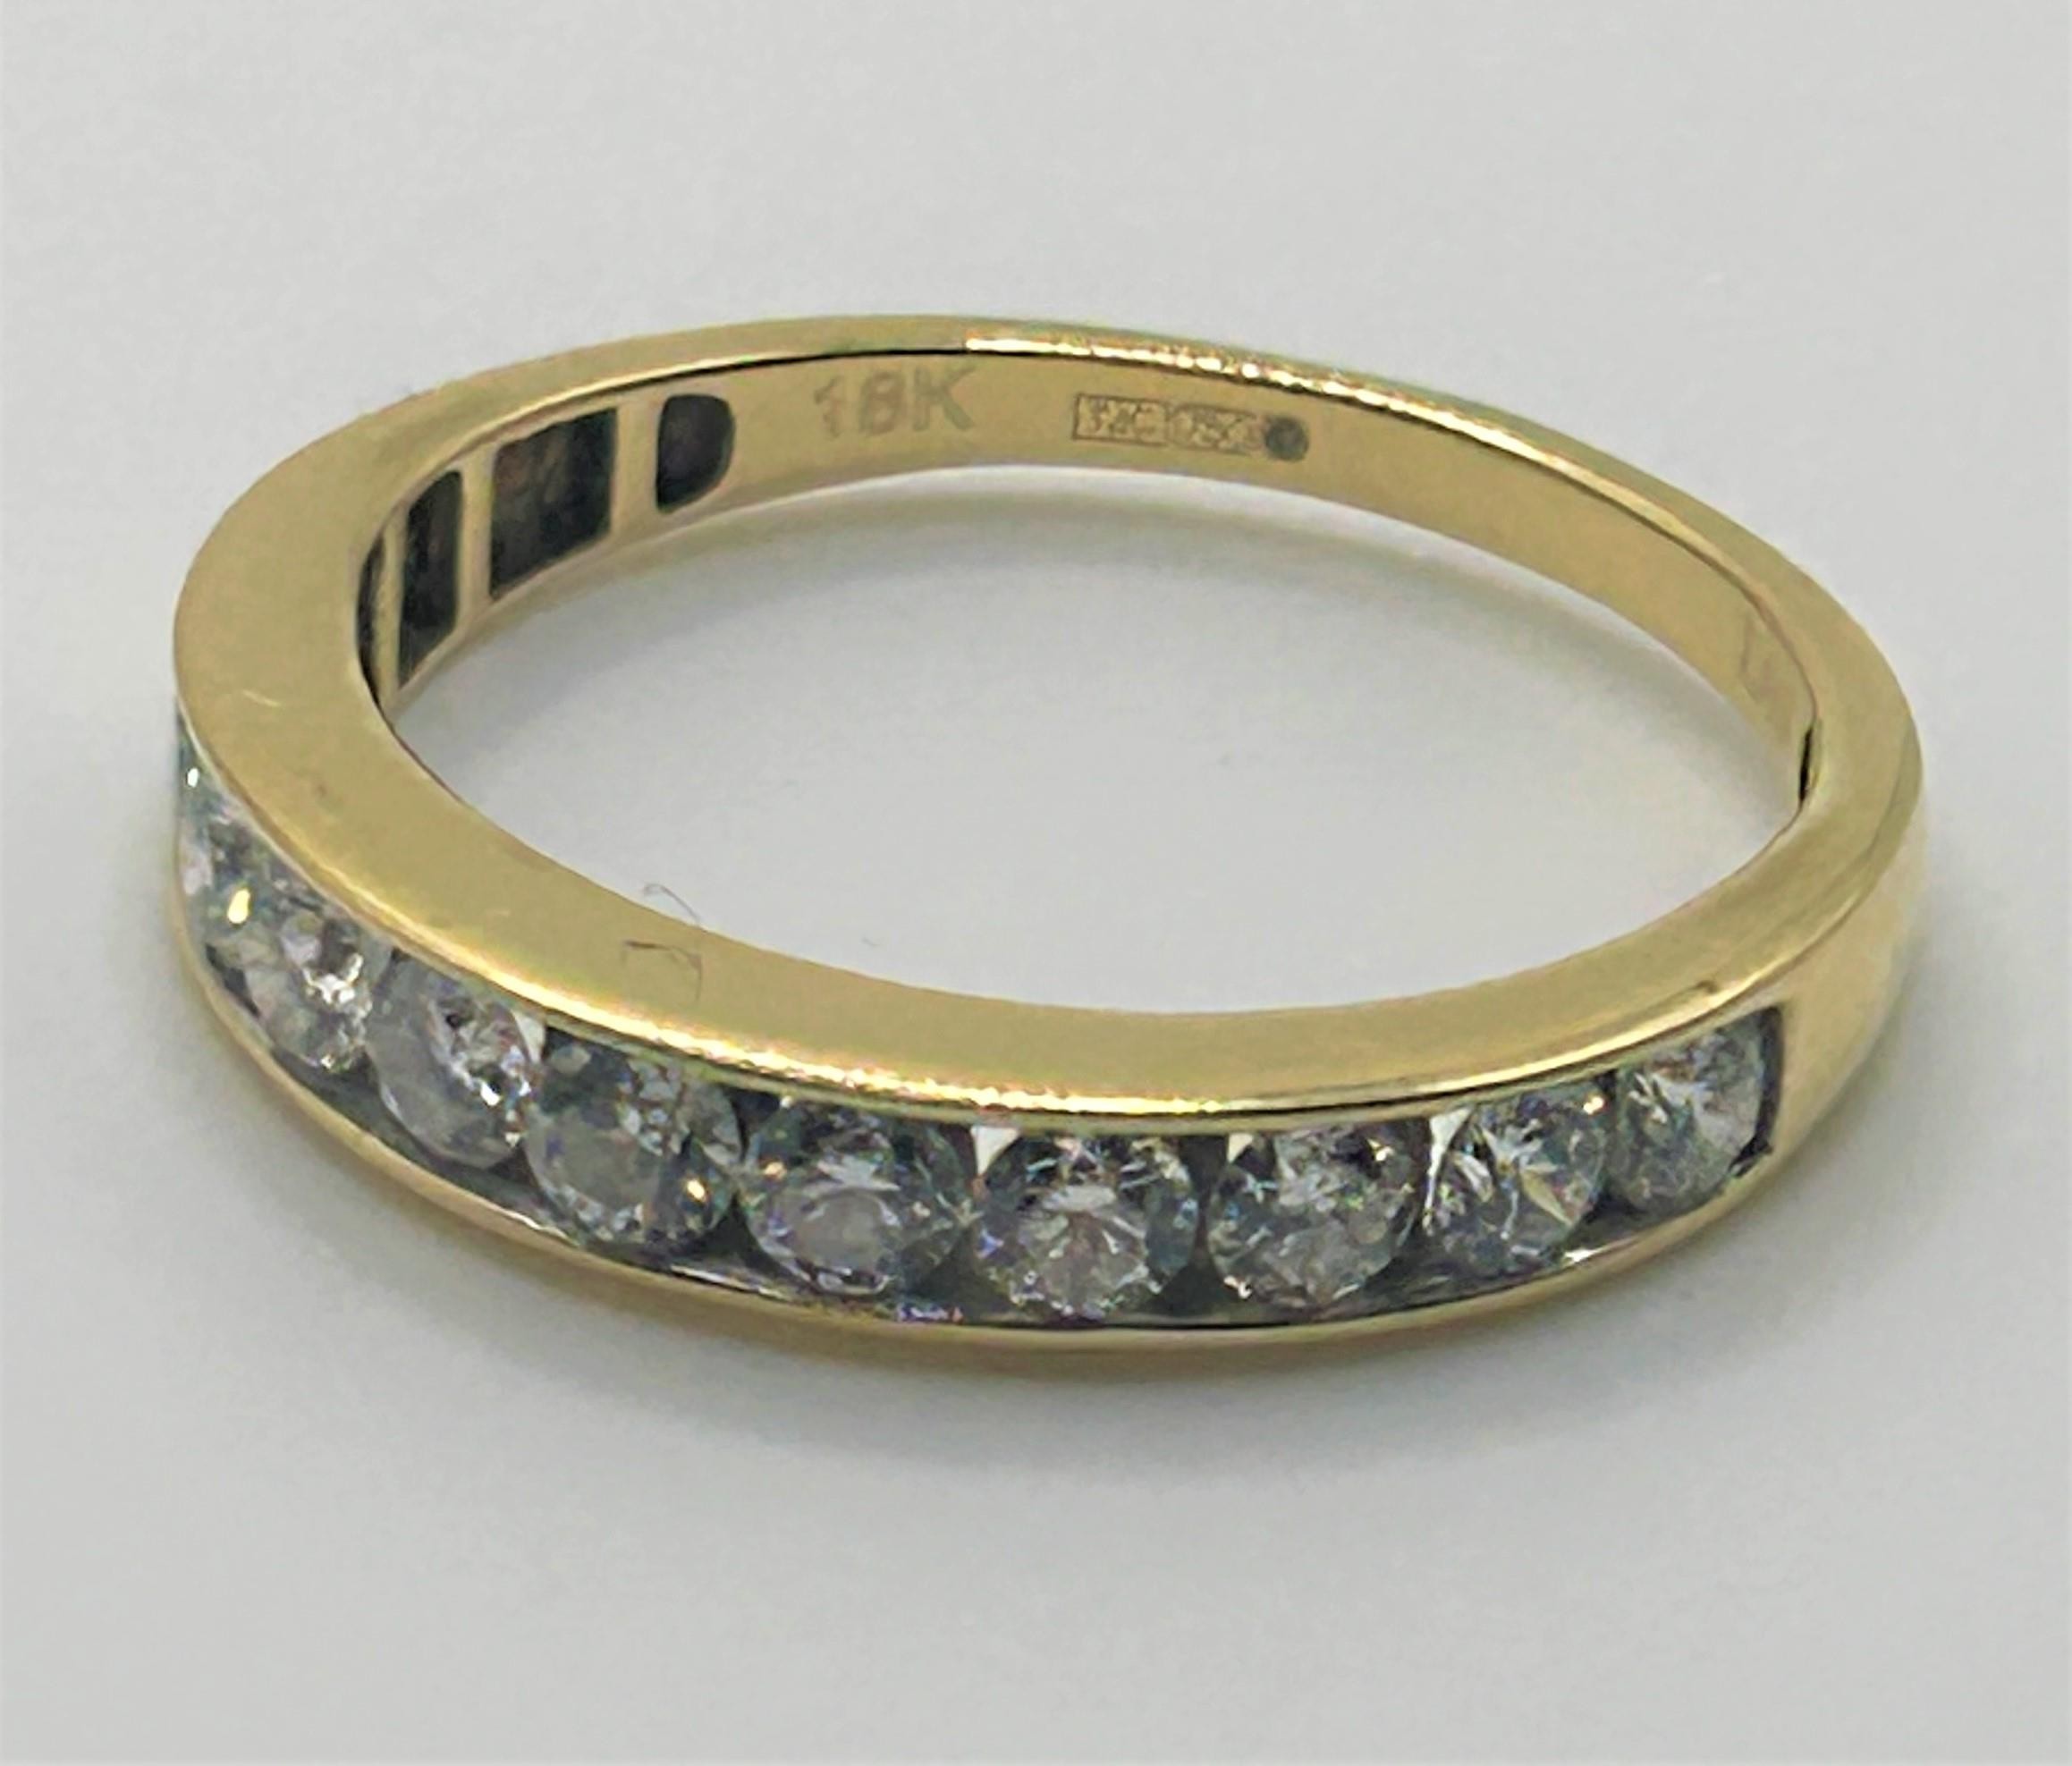 An 18ct gold and diamond ring, ring size S, with an International Gemological Institute